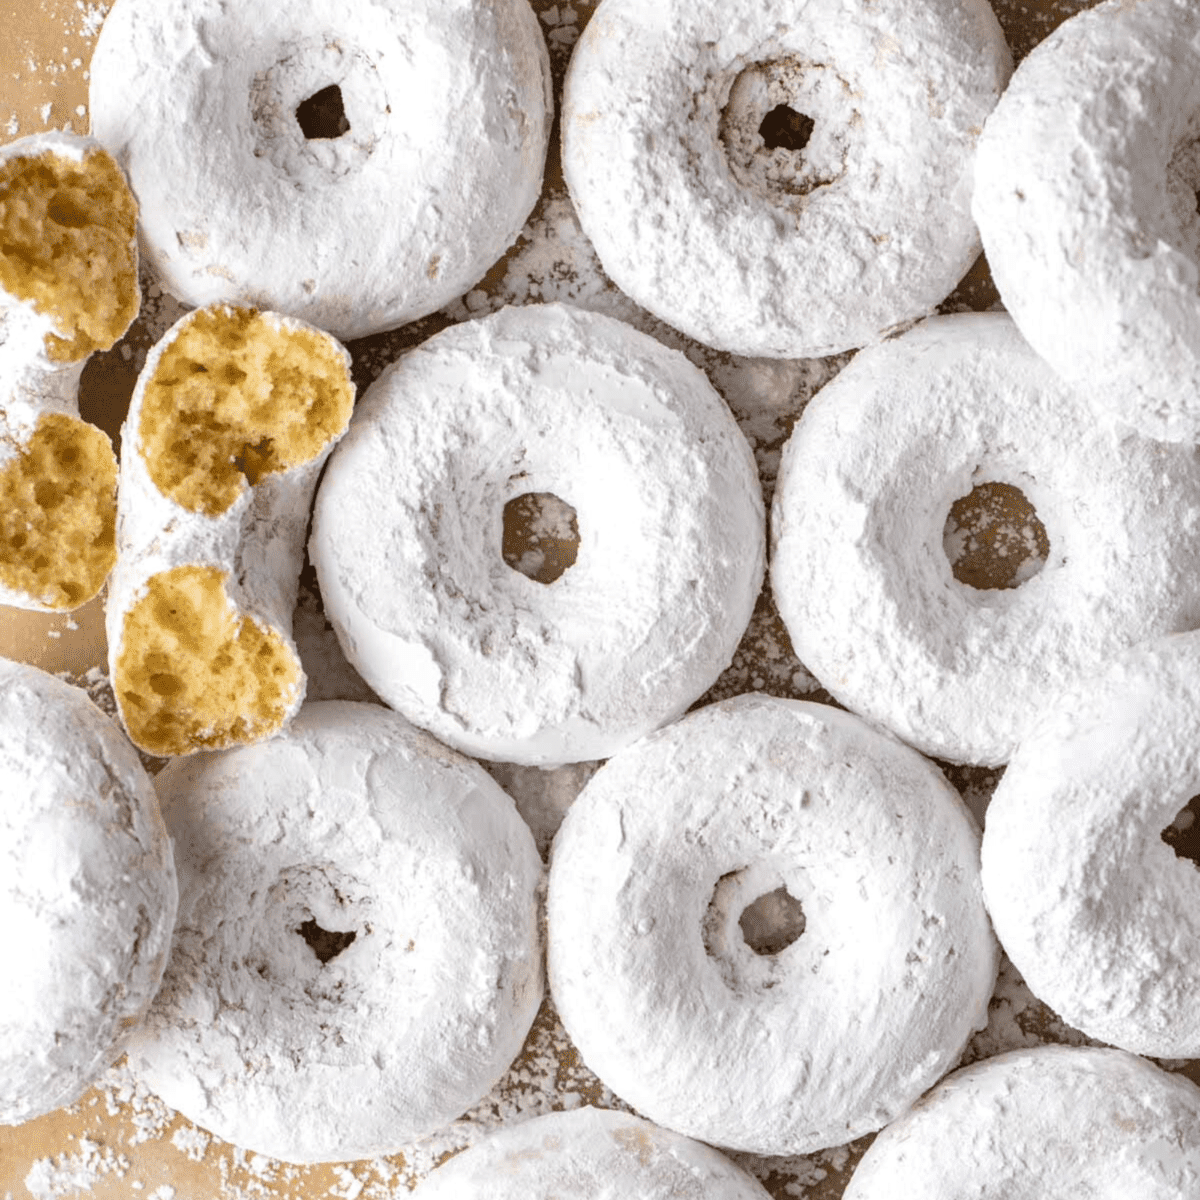 powdered sugar donuts arranged on brown paper